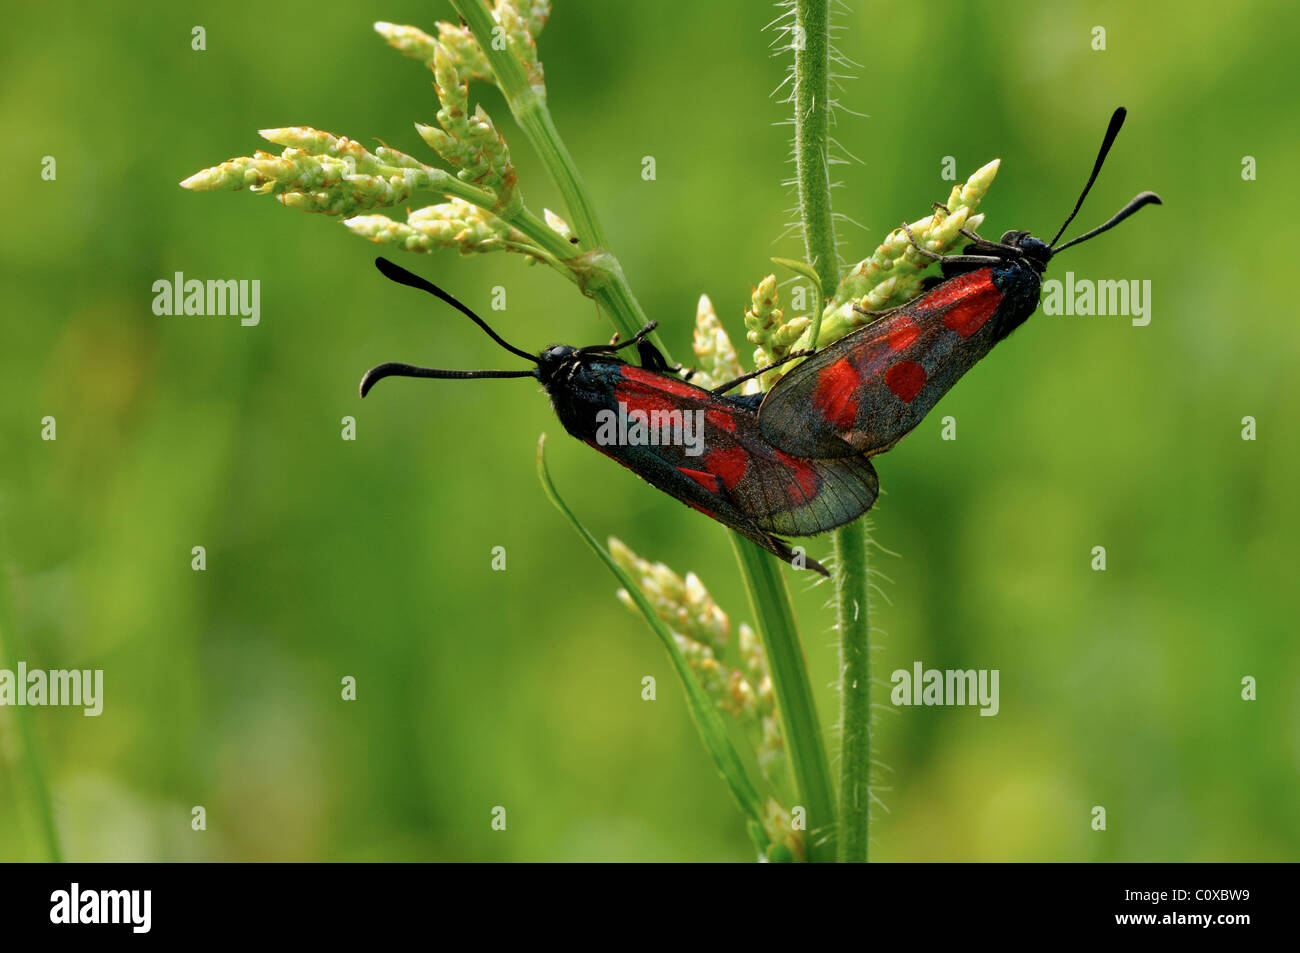 Insects feeding on flowers during summertime Stock Photo